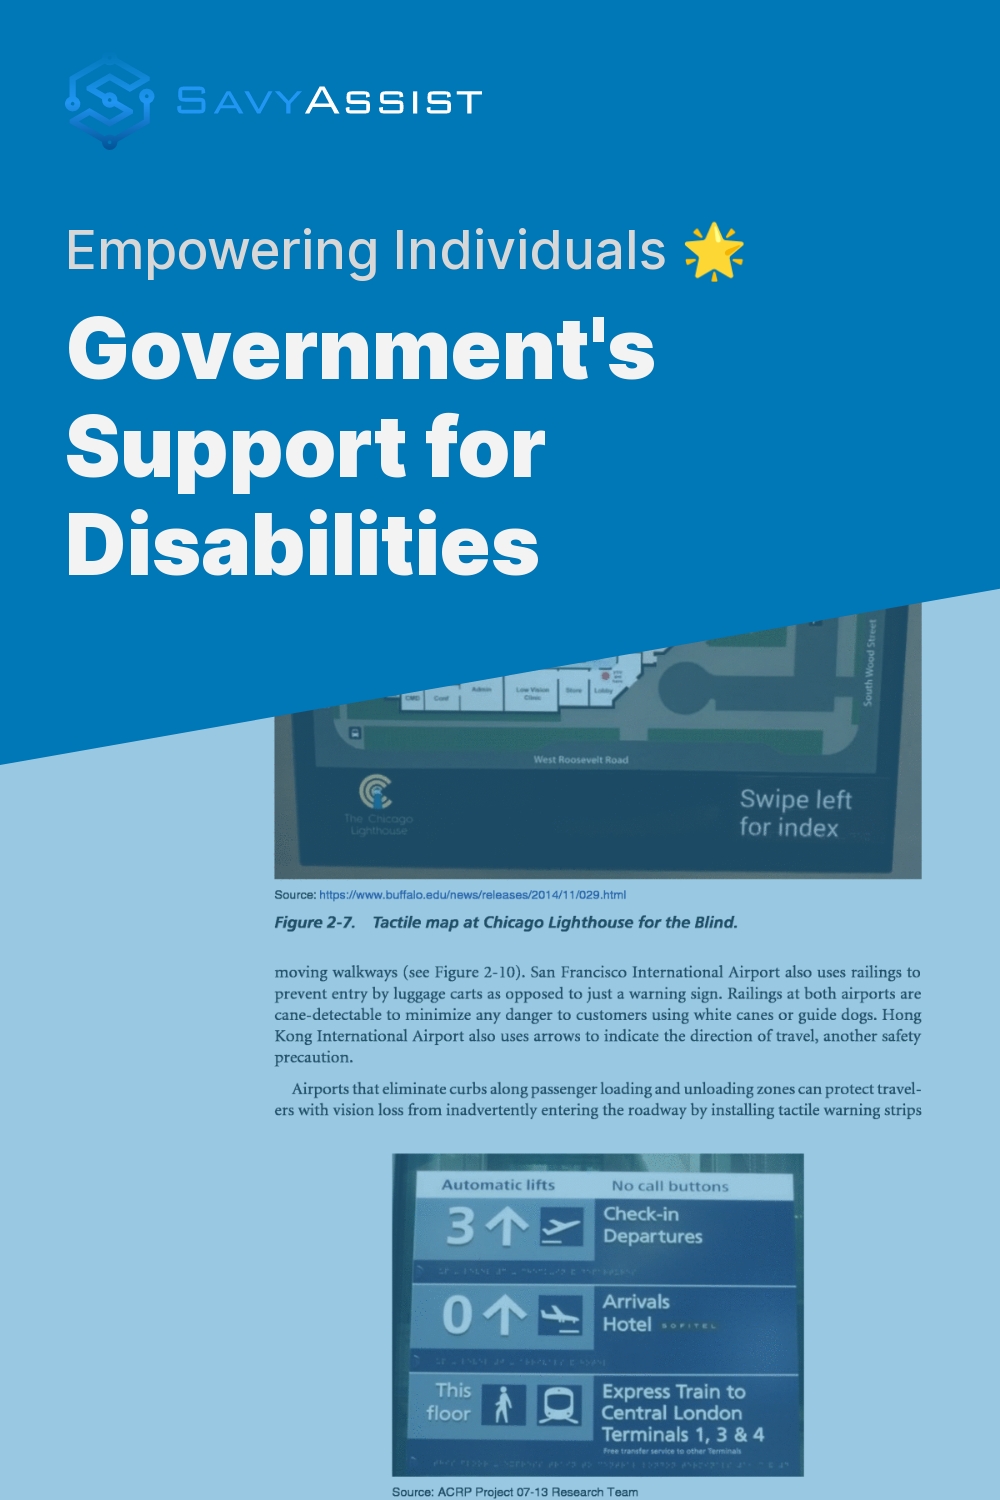 Government's Support for Disabilities - Empowering Individuals 🌟